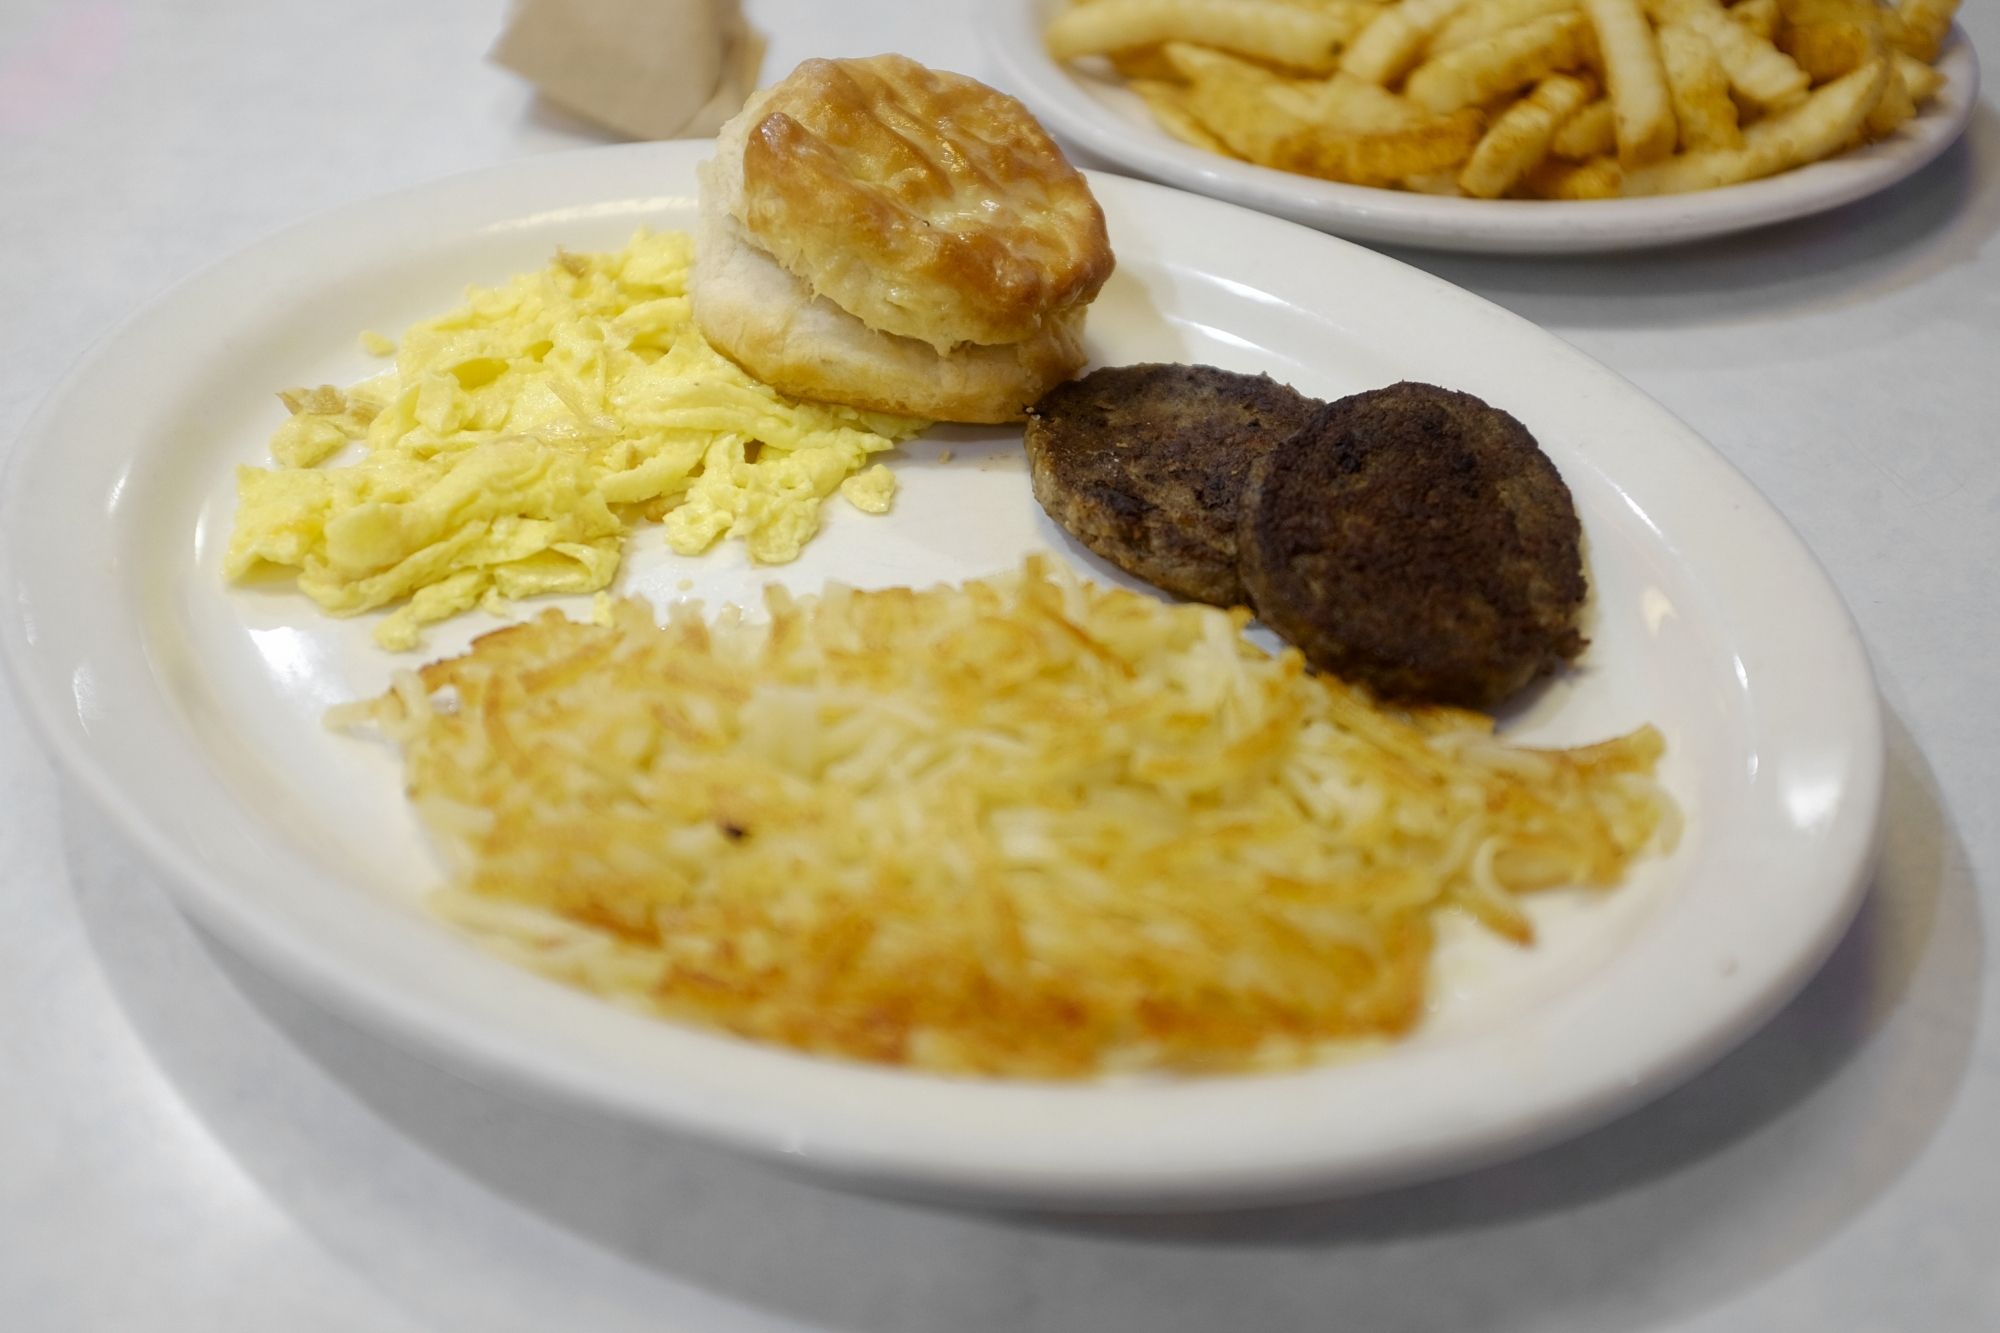 One Egg Plate with Sausage, Hashbrowns, and Biscuit